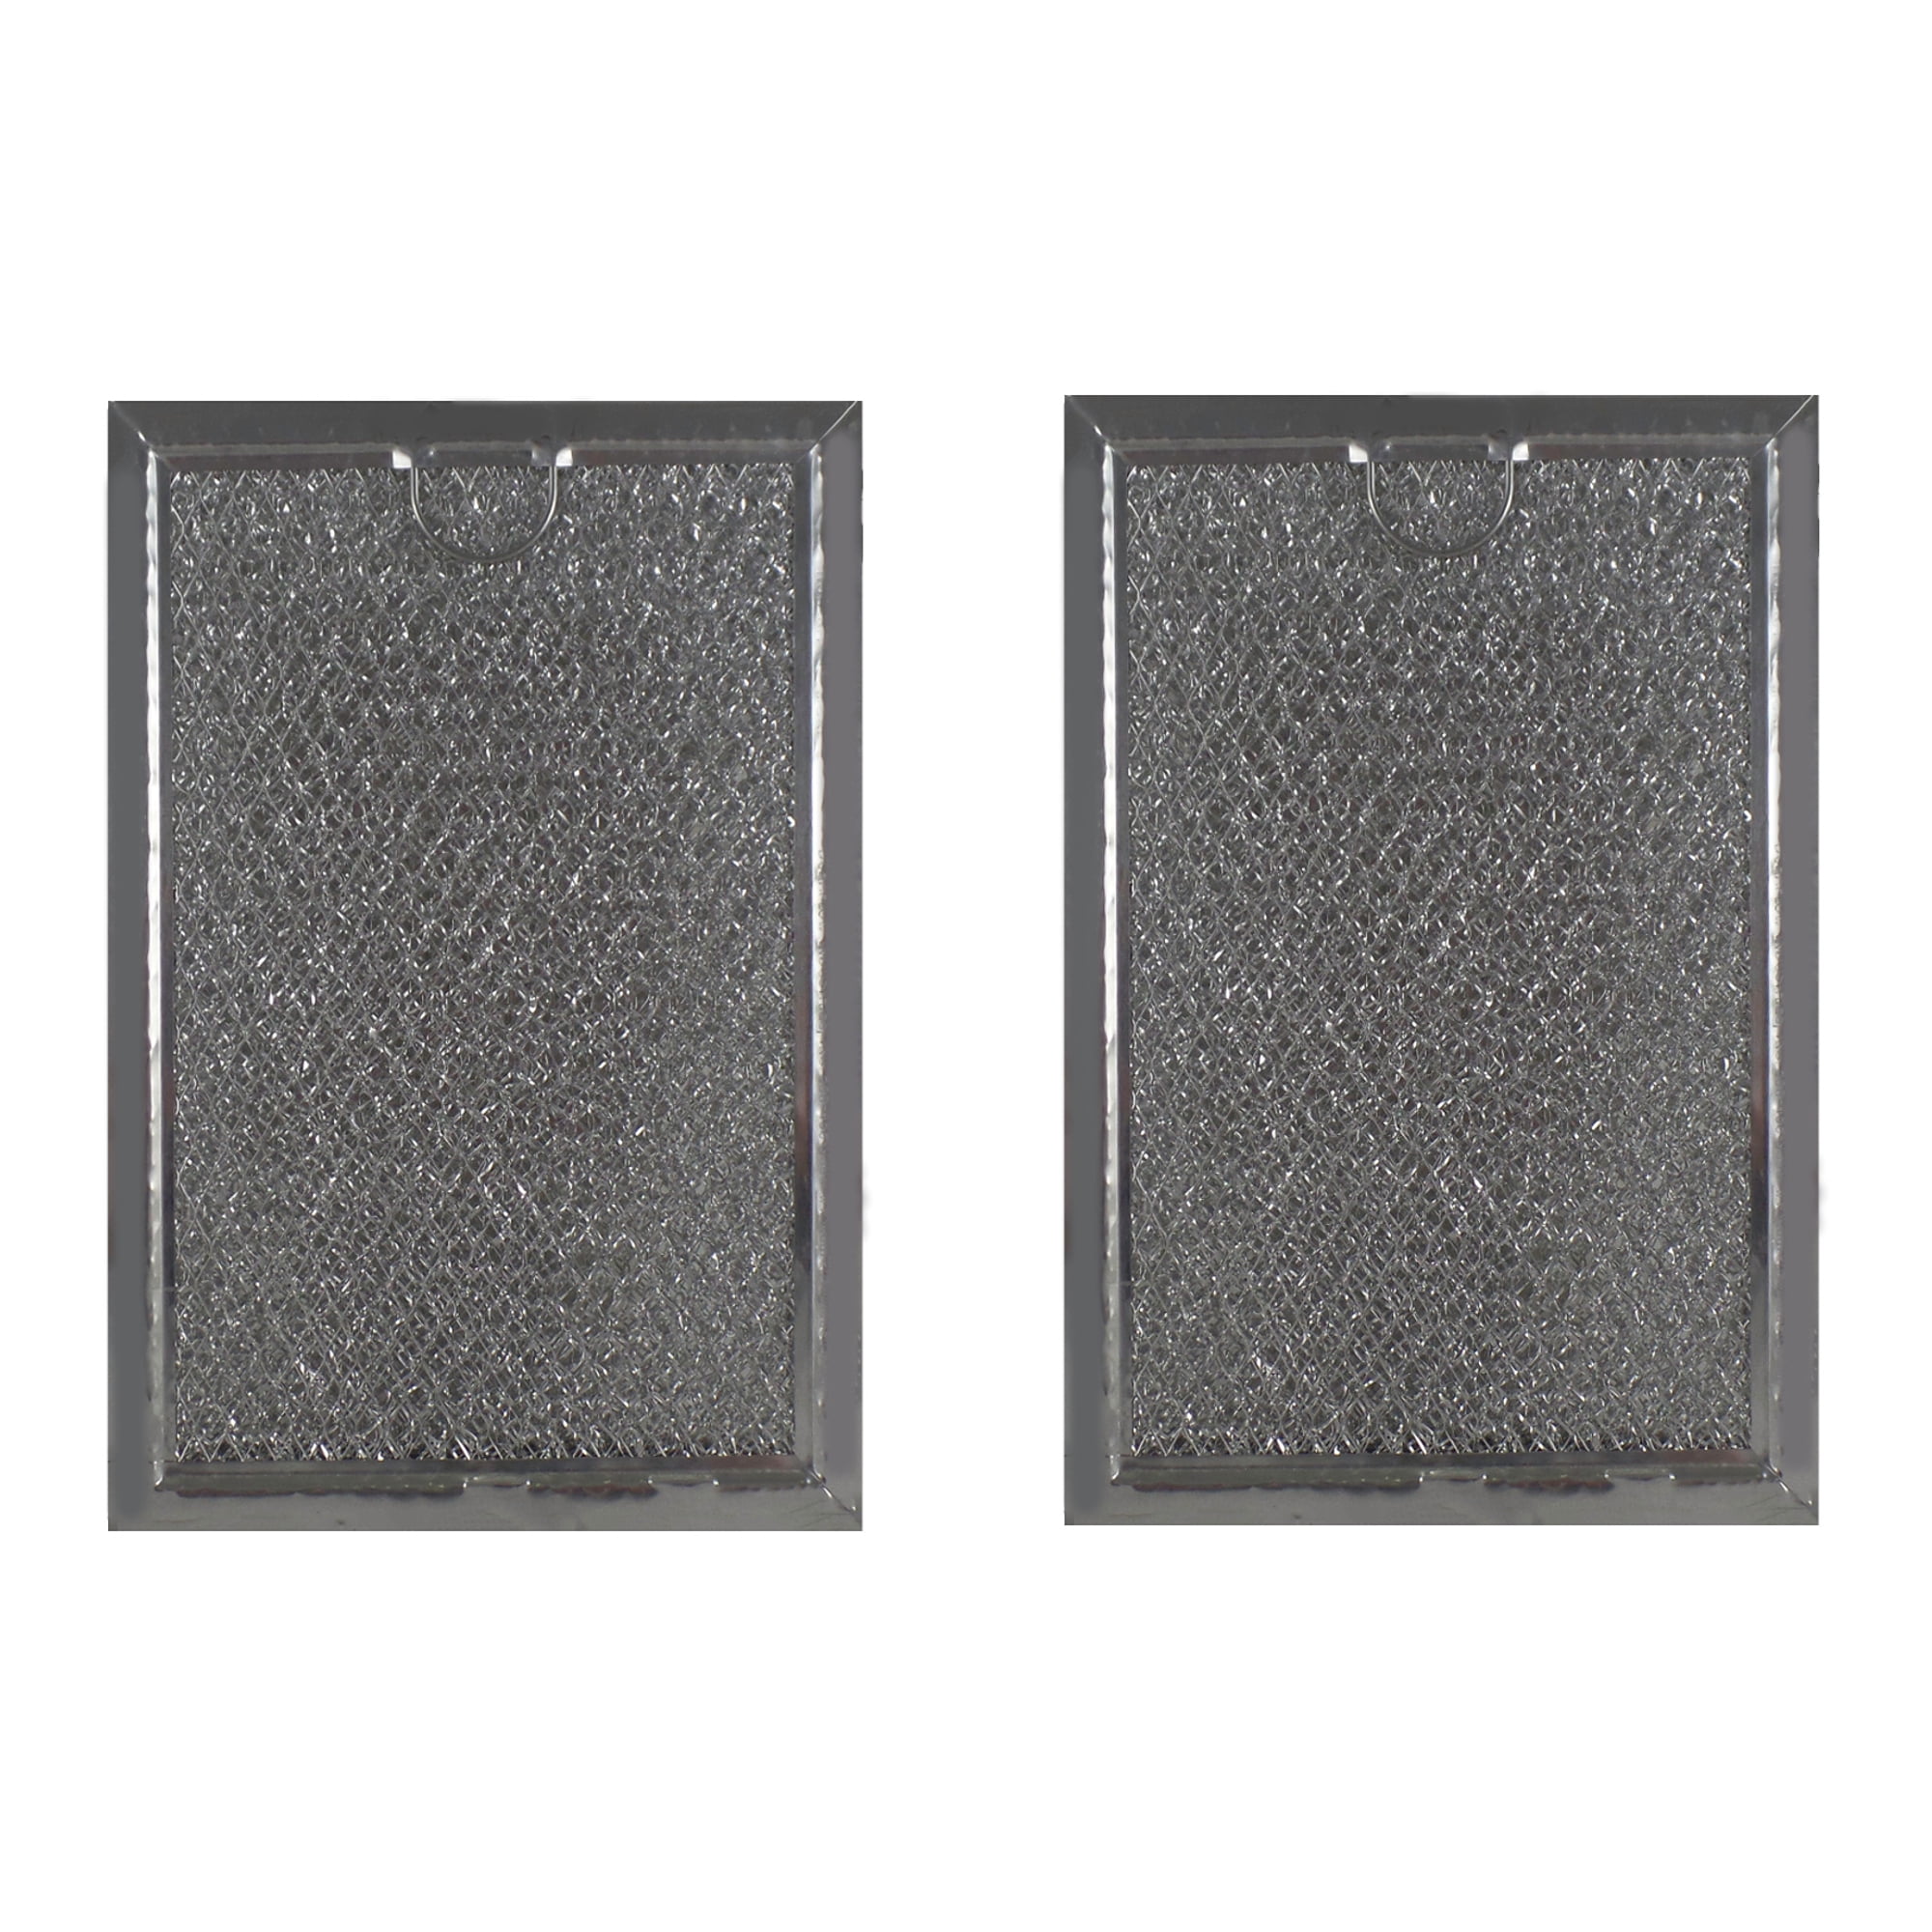 2-Pack Air Filter Factory Compatible Replacement for Frigidaire 5303319568 Aluminum Grease Mesh Microwave Oven Filter 5-7/8 x 7-7/8 x 1/8 AFF81-M